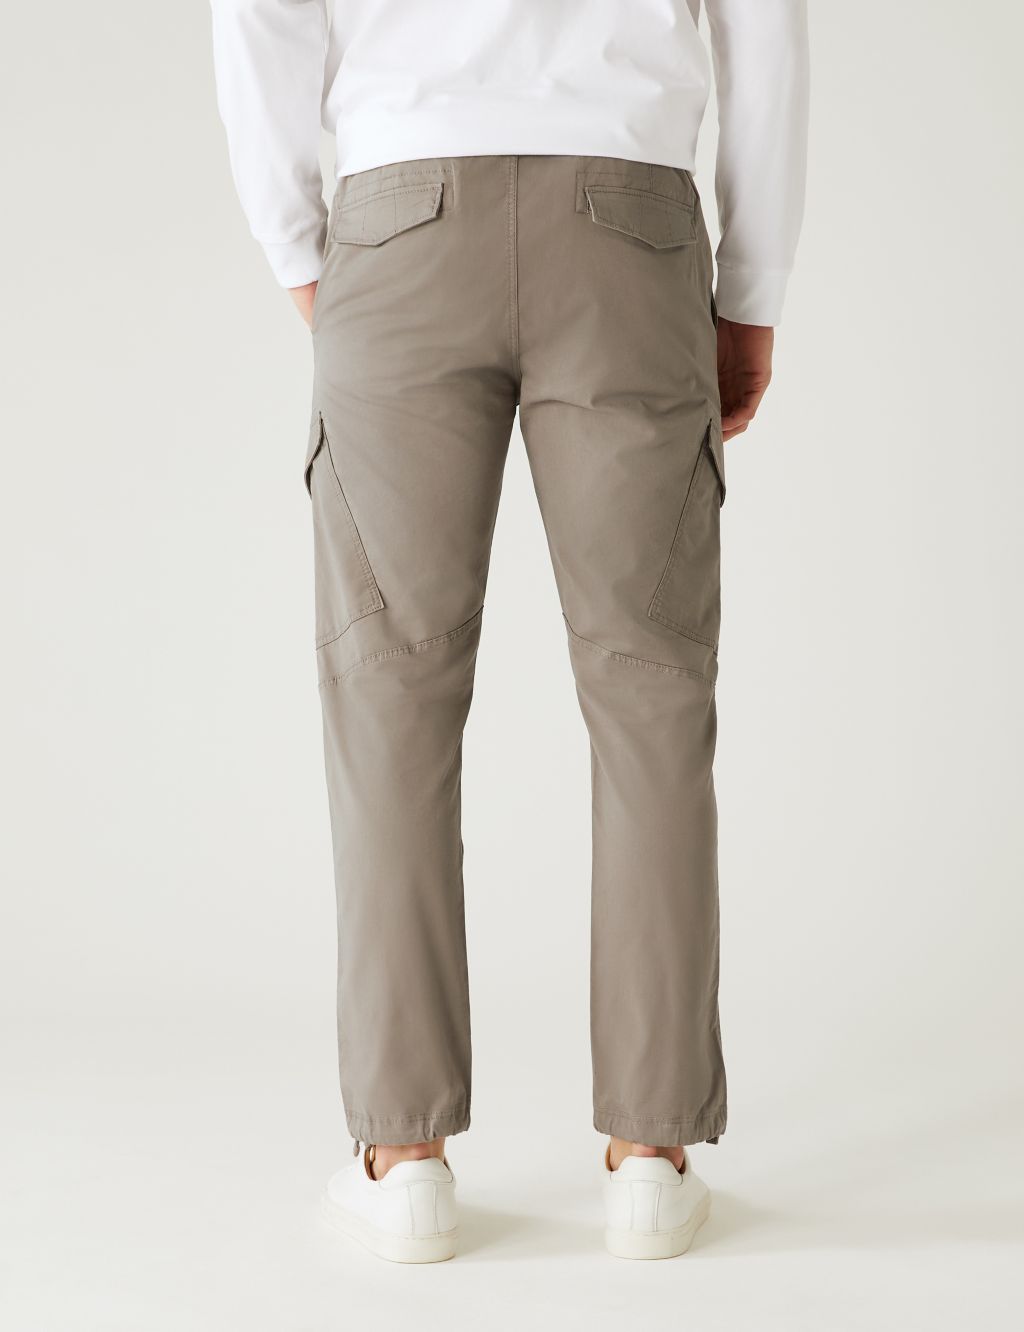 Slim Fit Elasticated Waist Cargo Trousers image 4